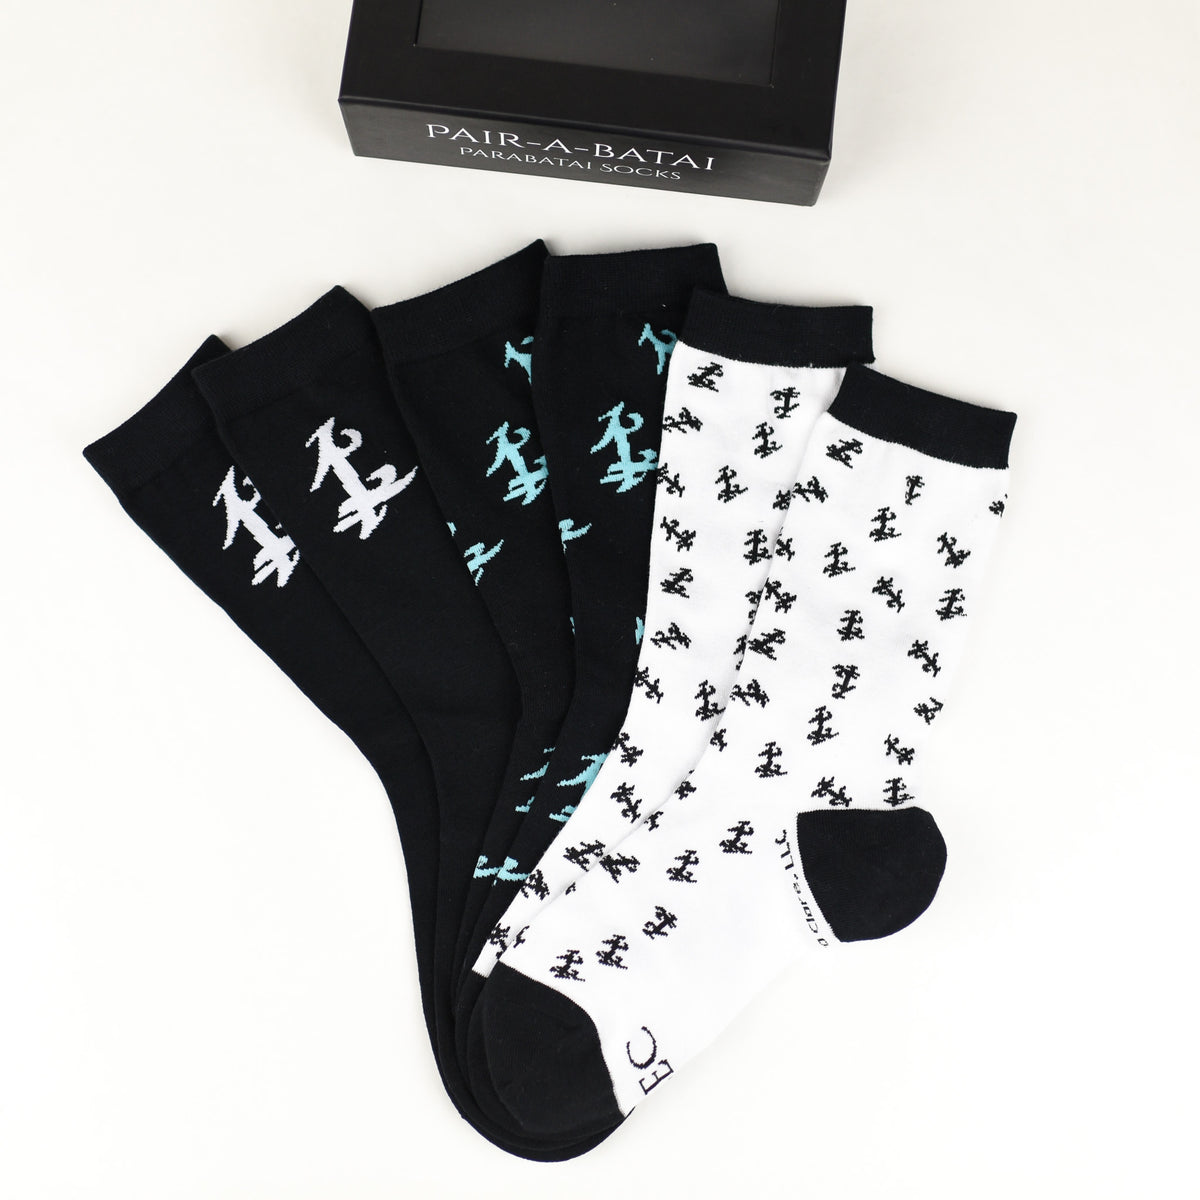 Parabatai Sock Set with two black and one white pair of fashion socks with runes from Cassandra Clare&#39;s Shadowhunter Series